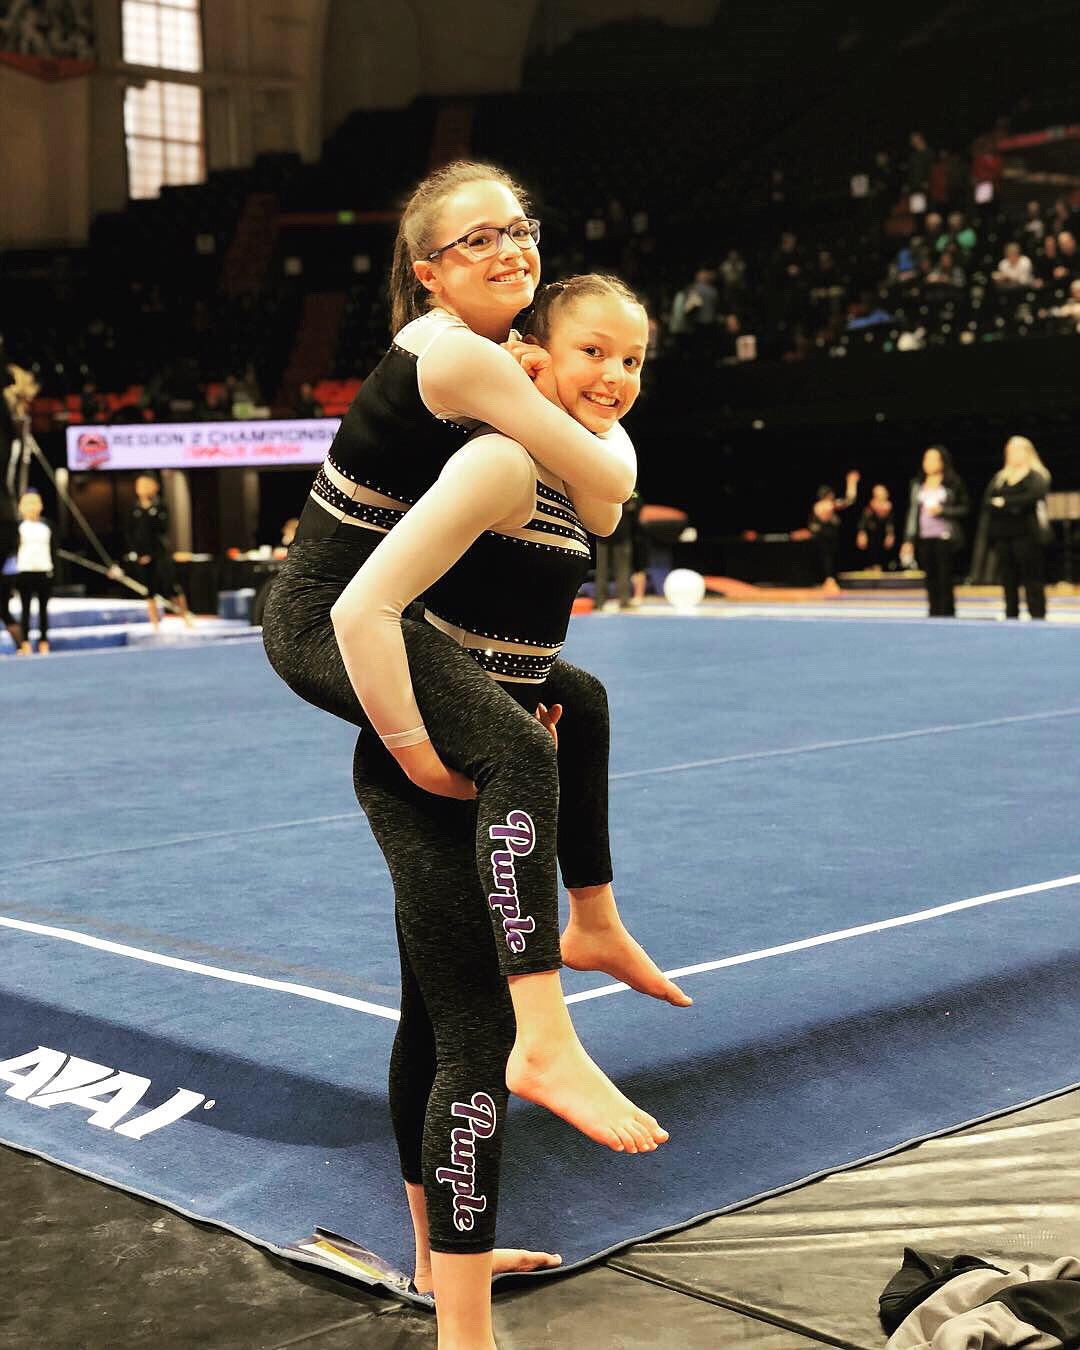 Courtesy photo
Avant Coeur Gymnastics Level 8s at the regional championships in Corvallis, Ore. From left are Danica McCormick and Madalyn McCormick.